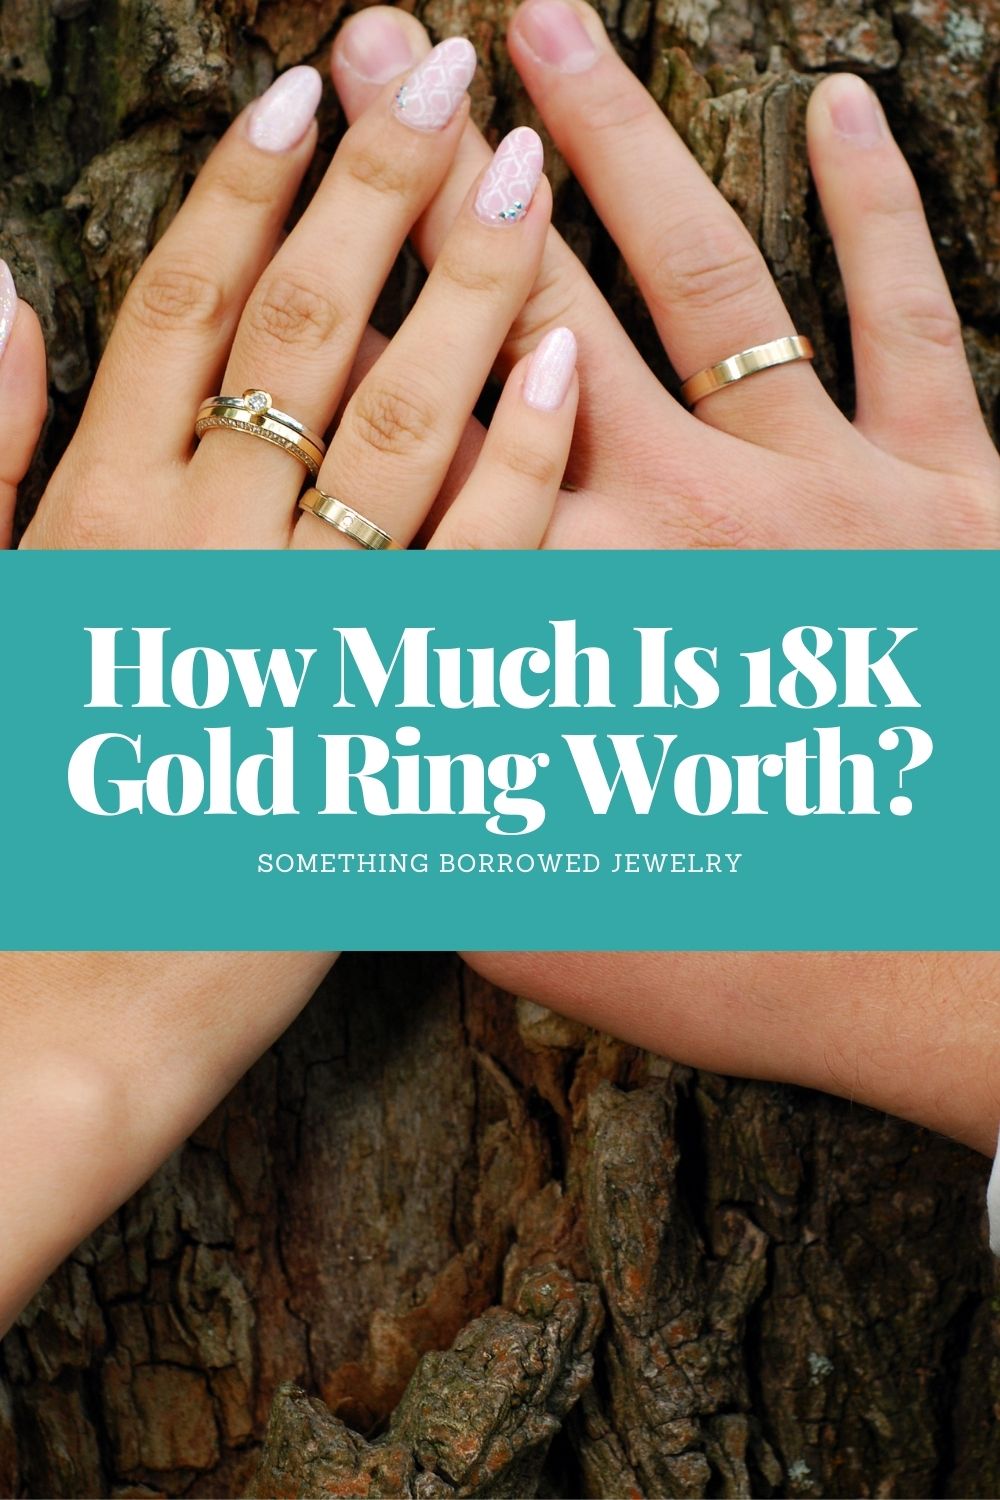 How Much Is 18K Gold Ring Worth?